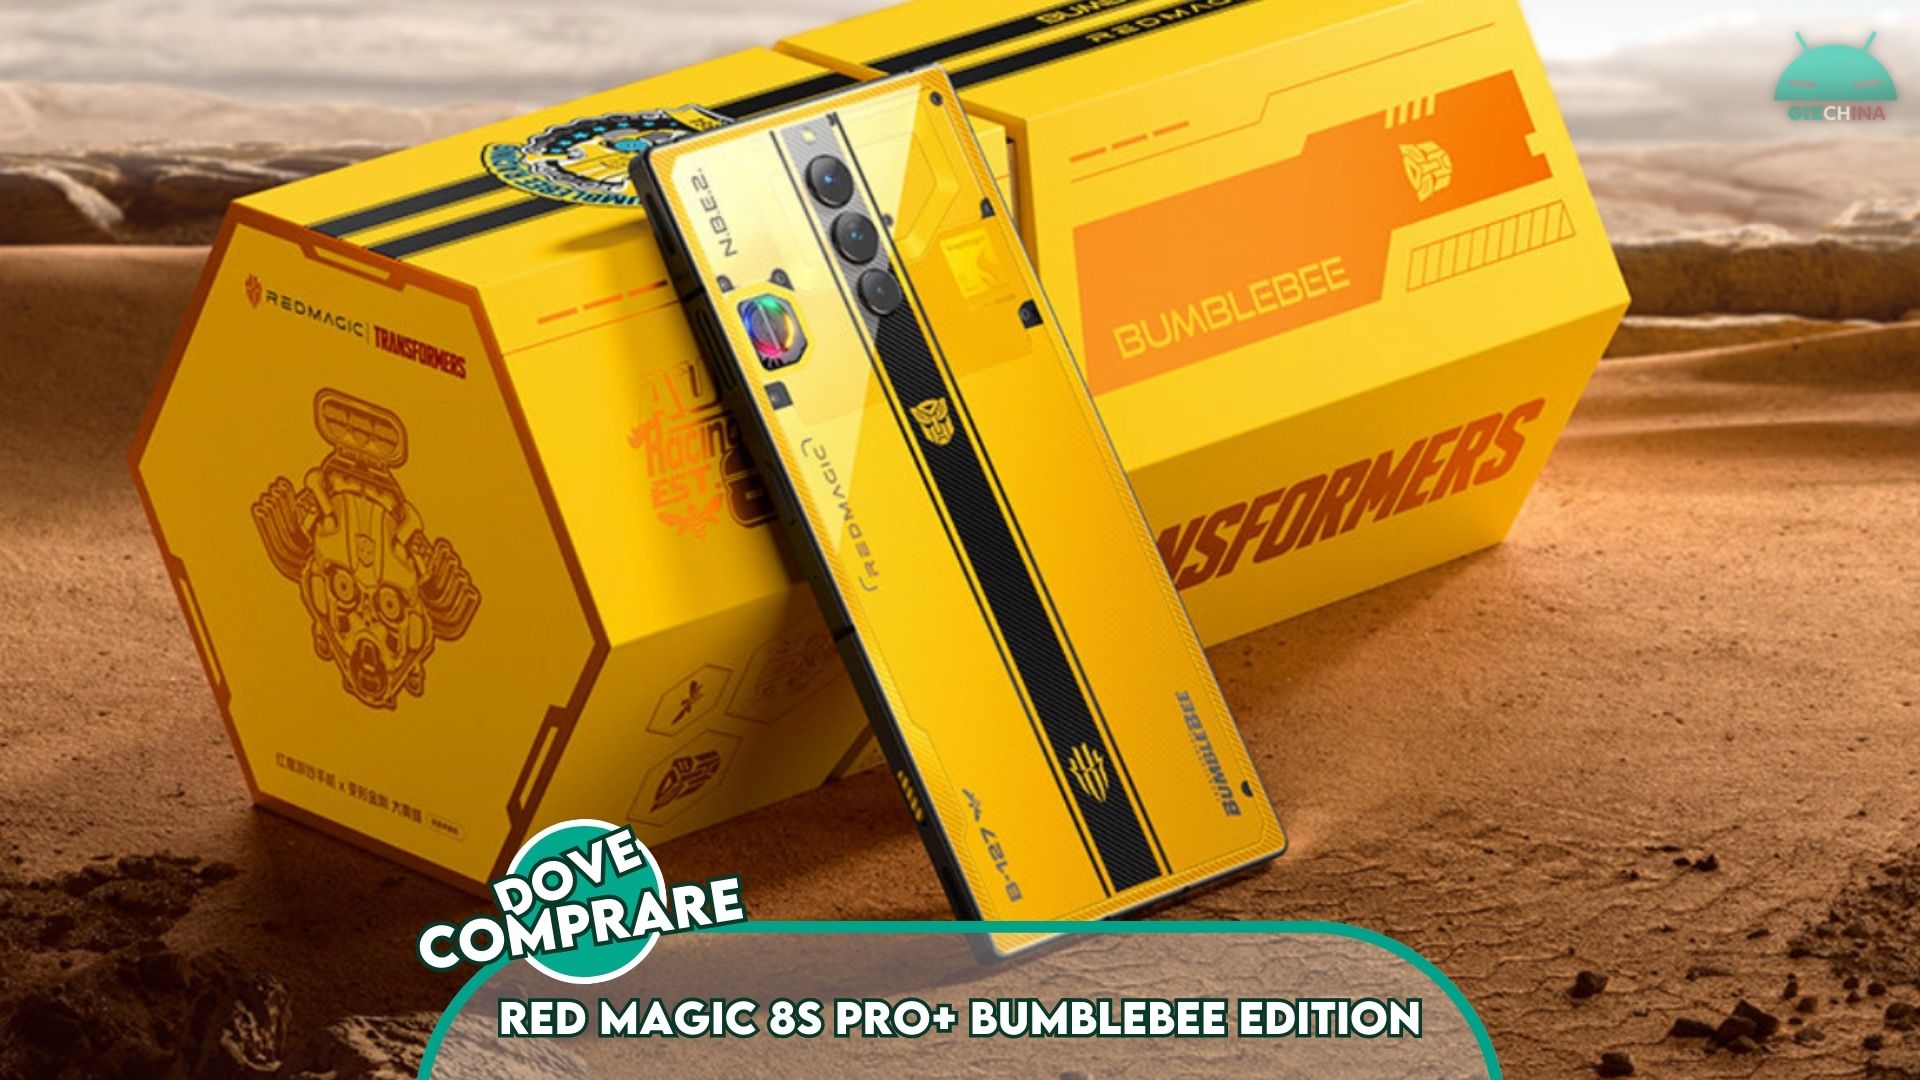 Red magic bumblebee edition